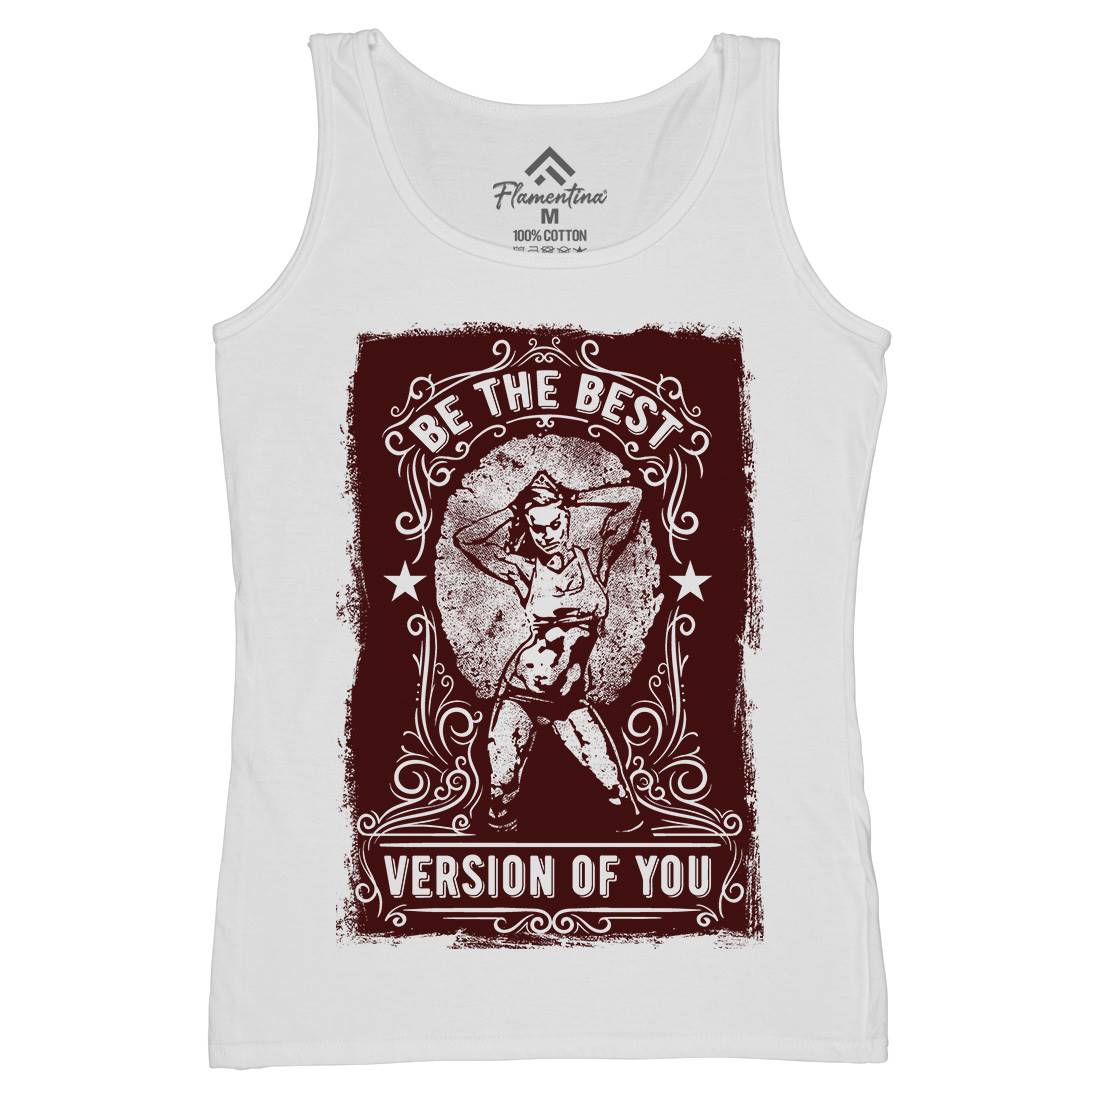 The Best Version Of You Womens Organic Tank Top Vest Gym C984